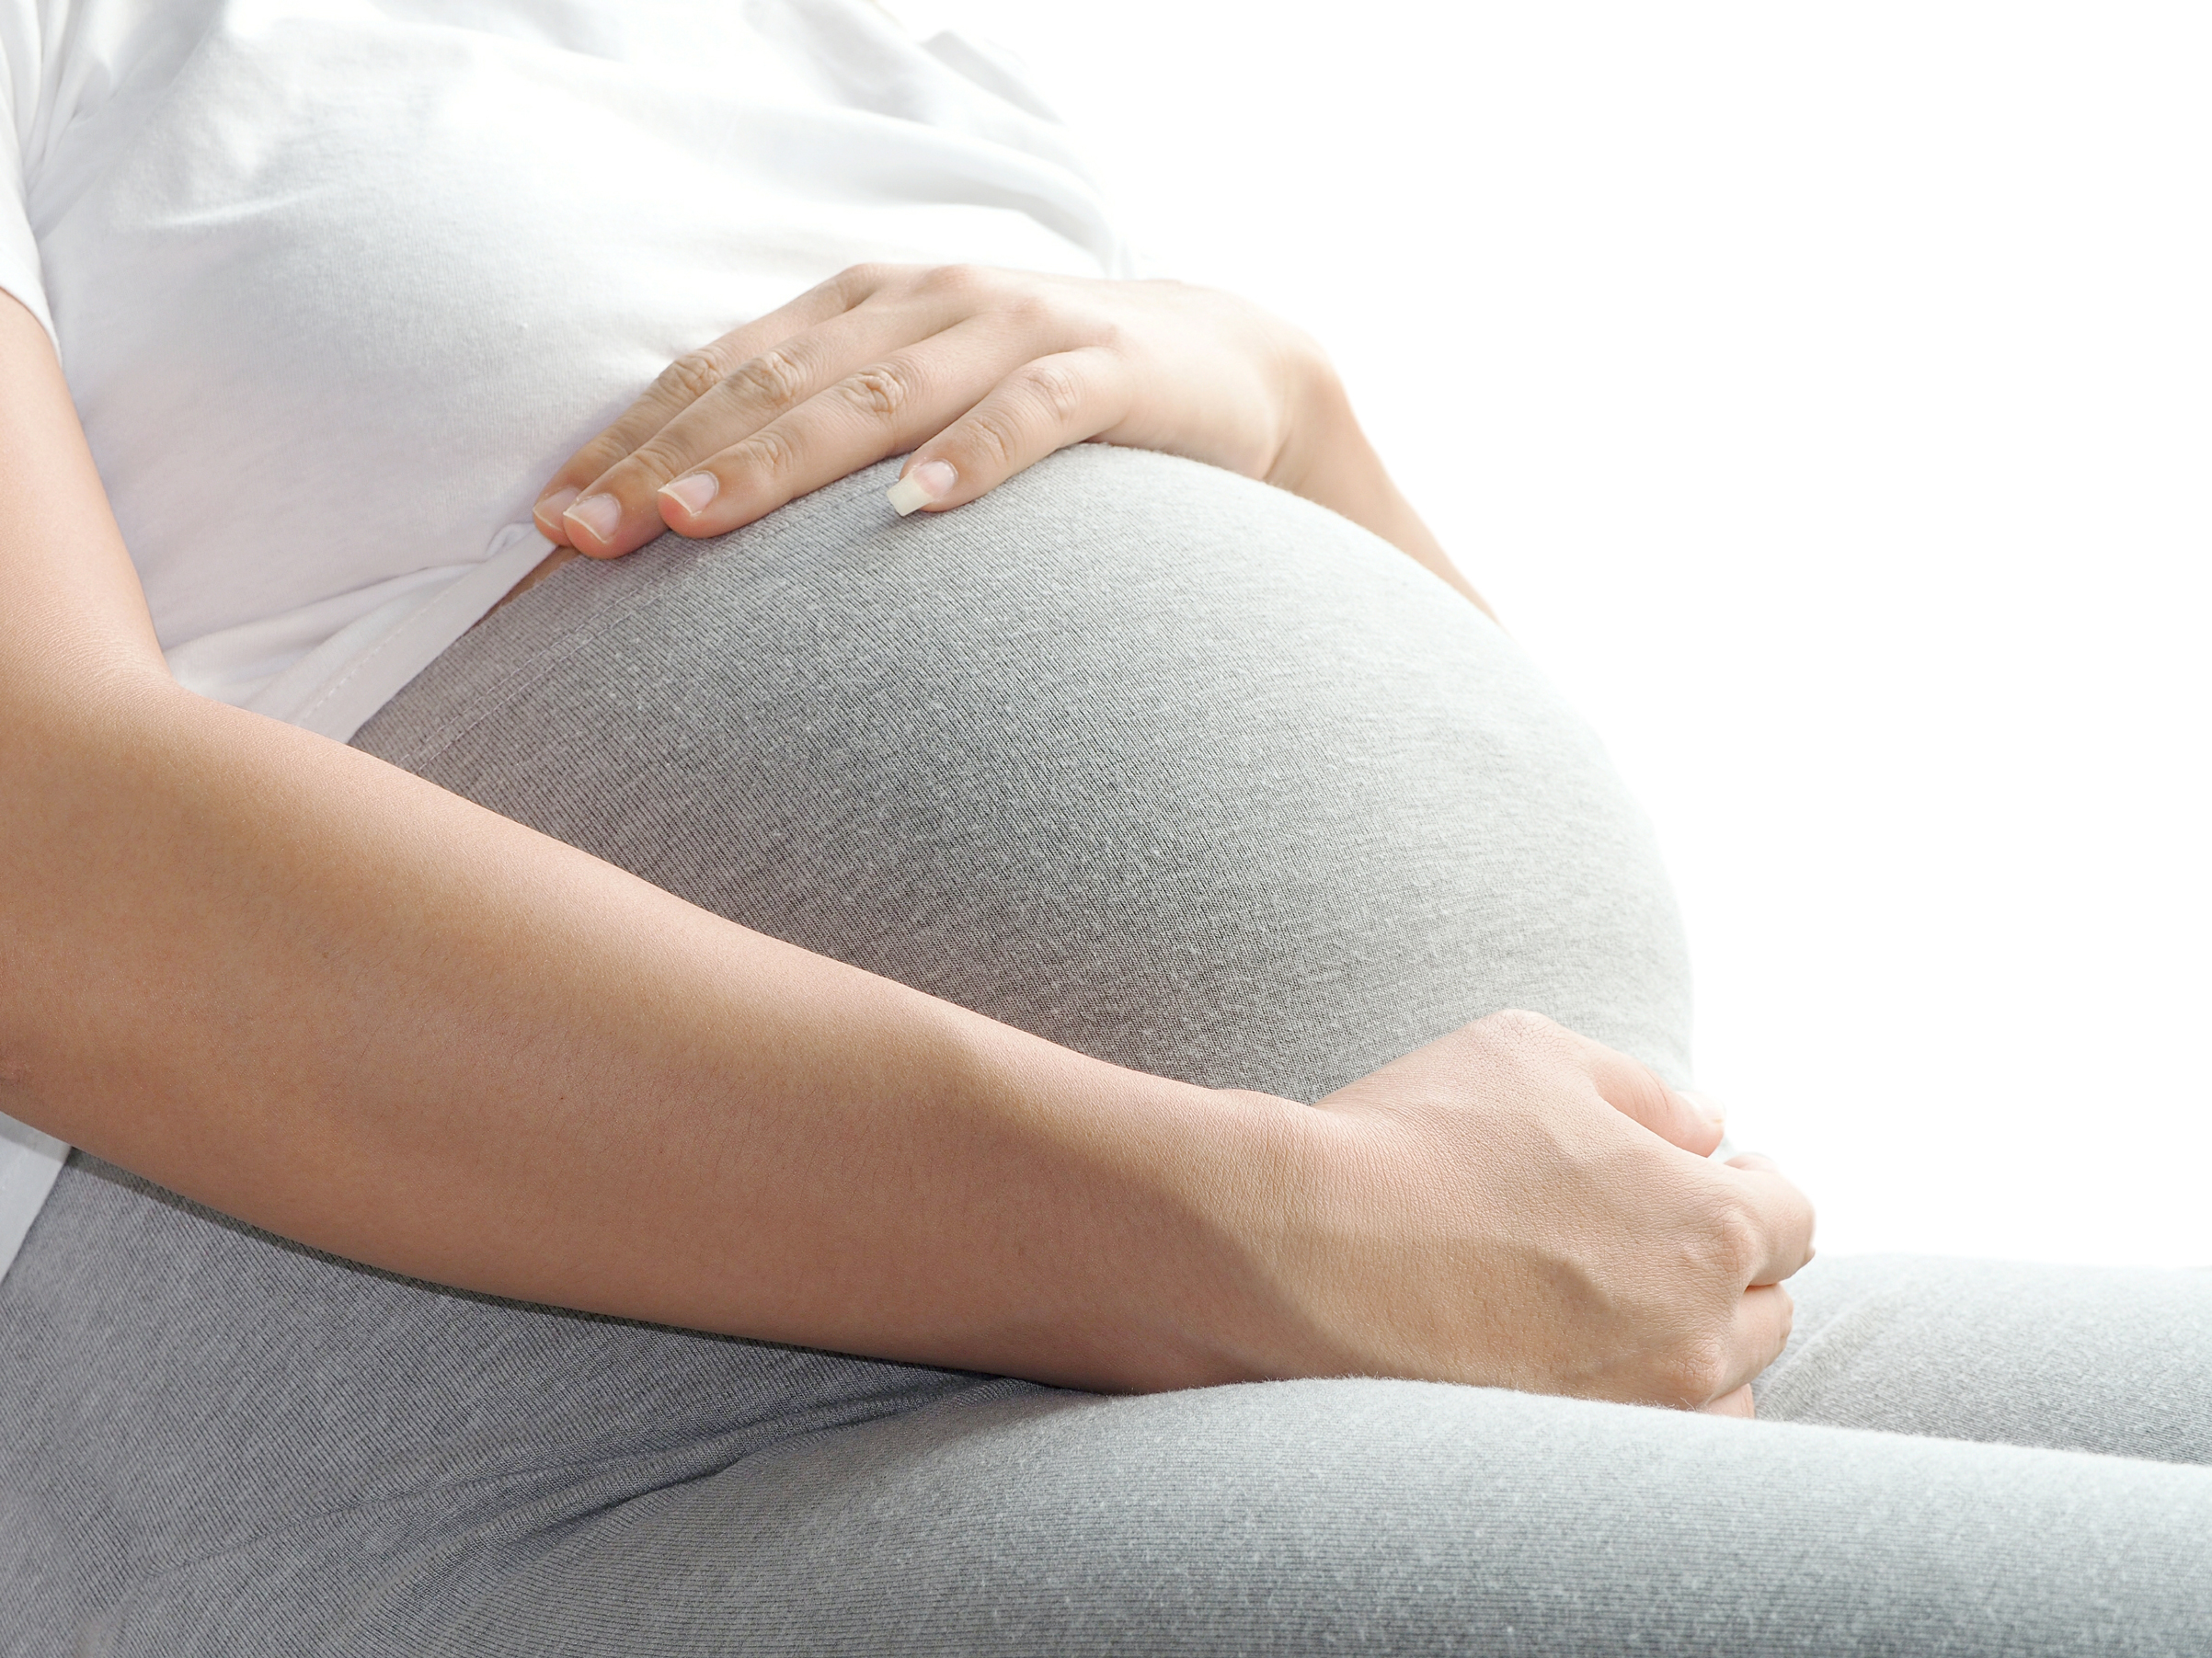 Pregnant women need to eat enough nutrition for the fetus in the womb